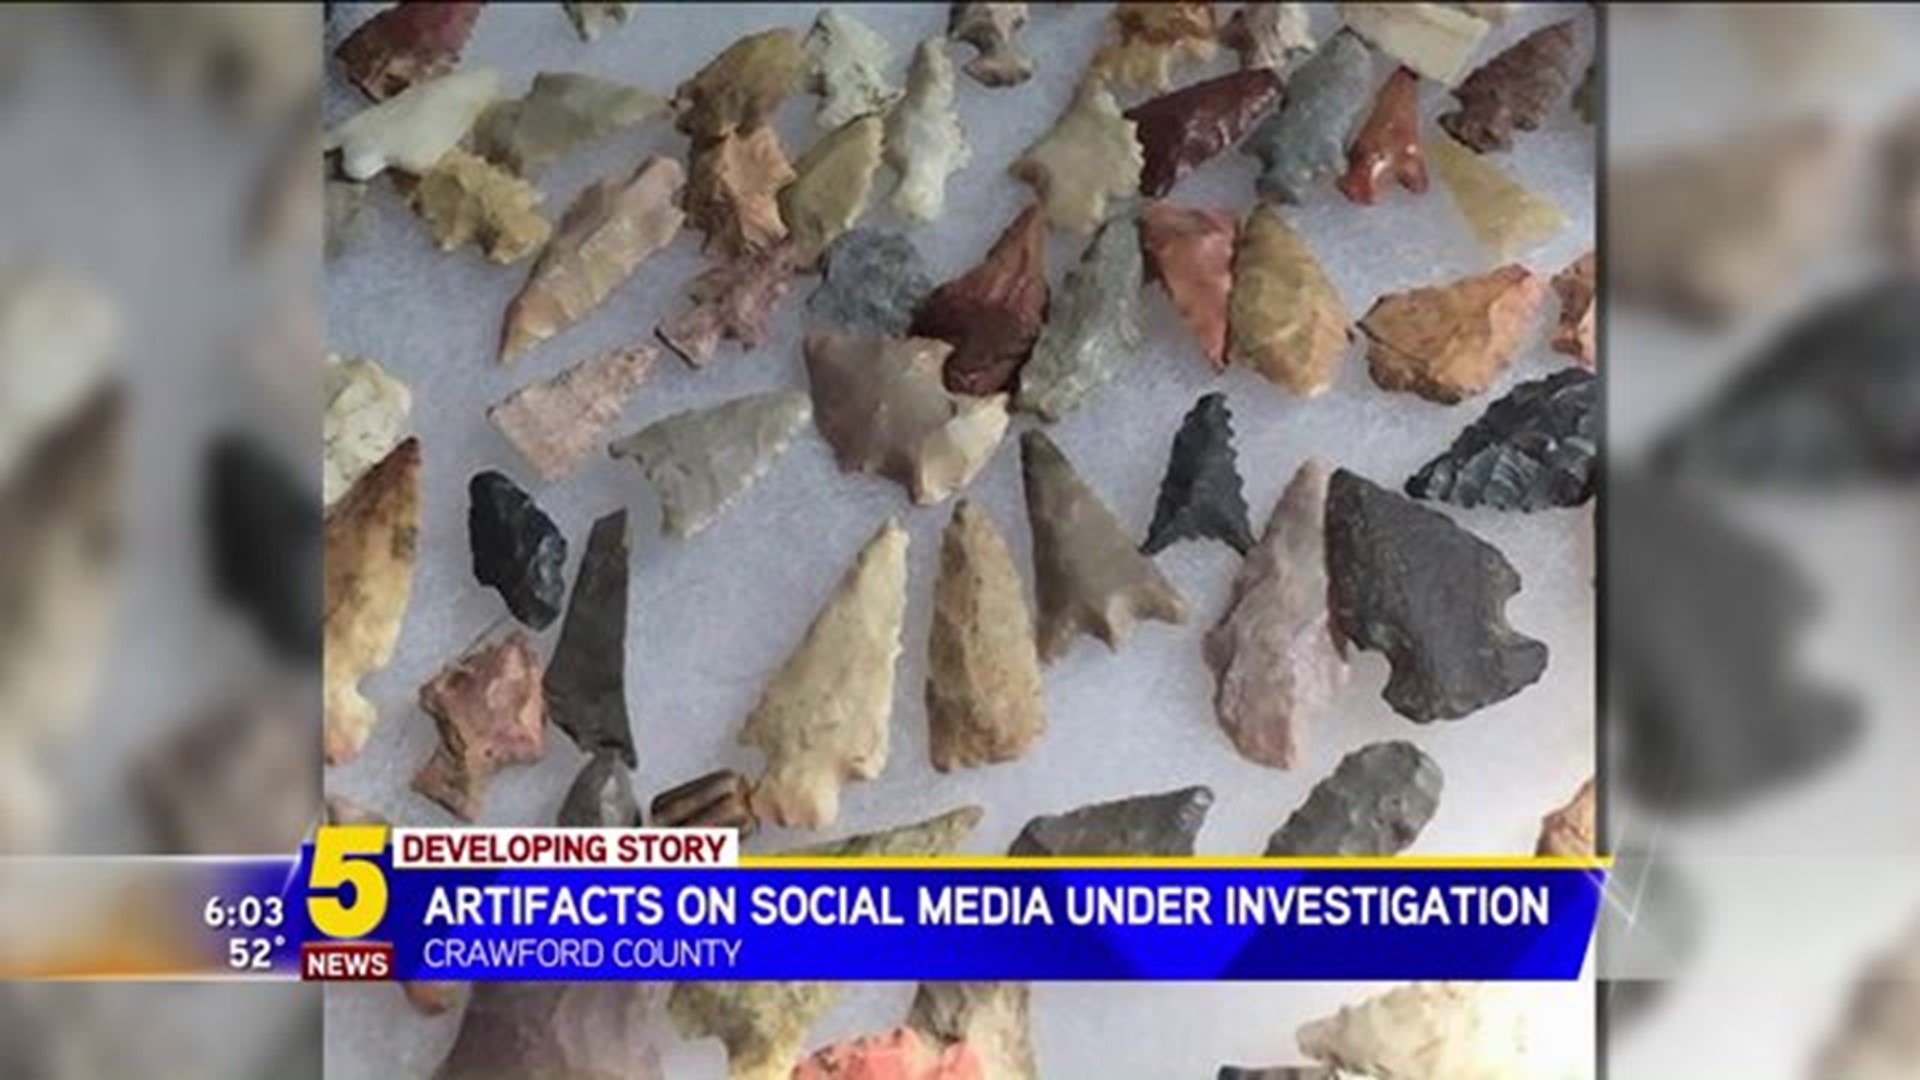 Social Media Posts of Artifacts Lead to Federal Investigation